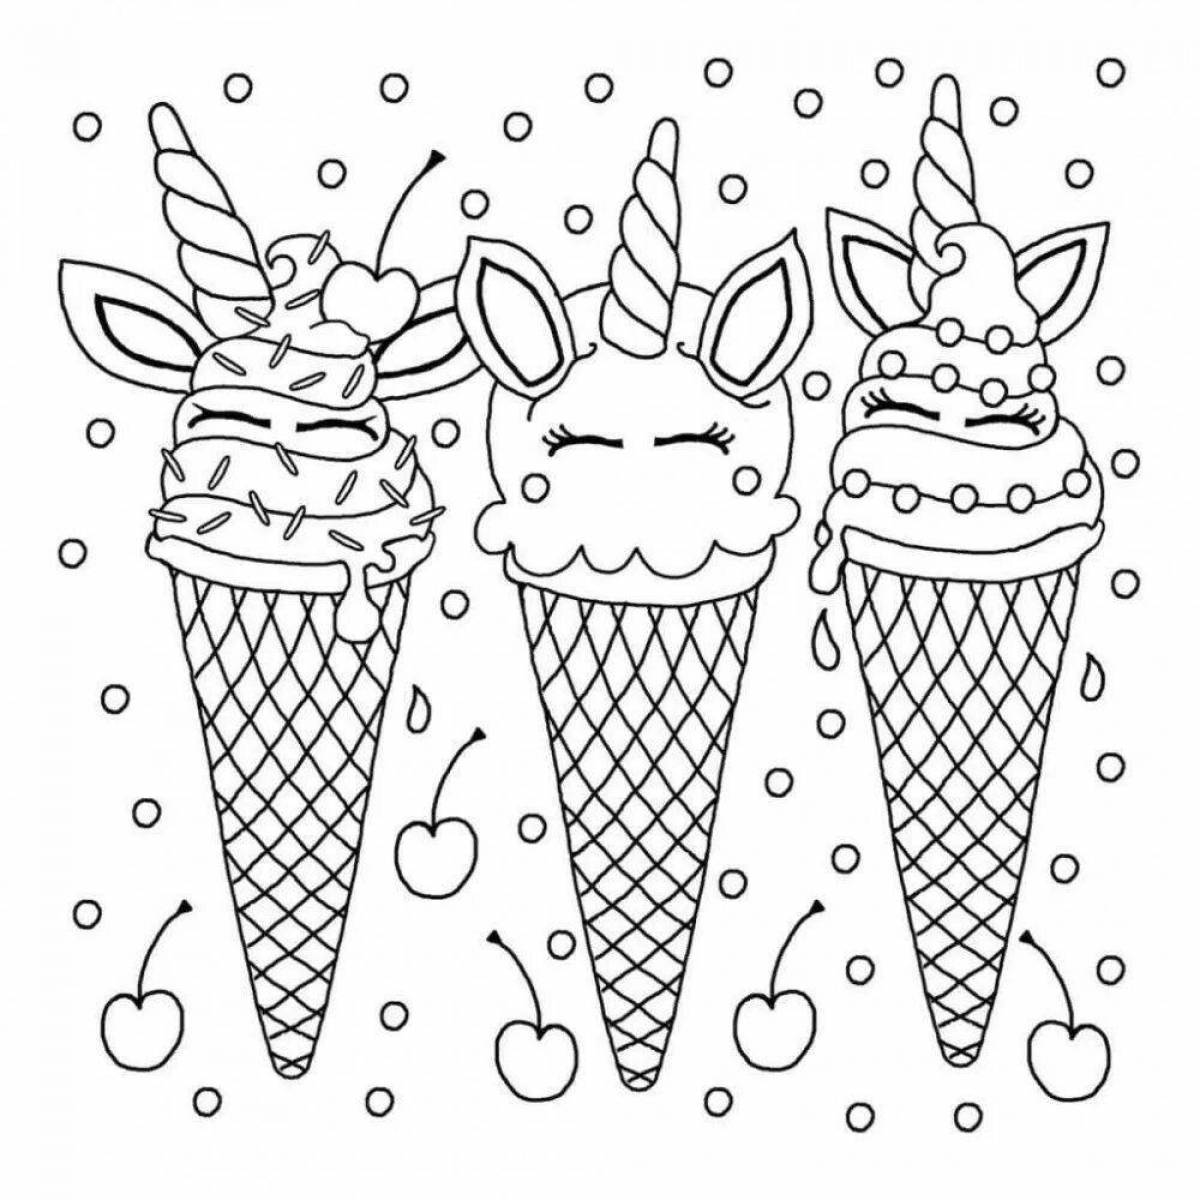 Coloring playtime ice cream for kids